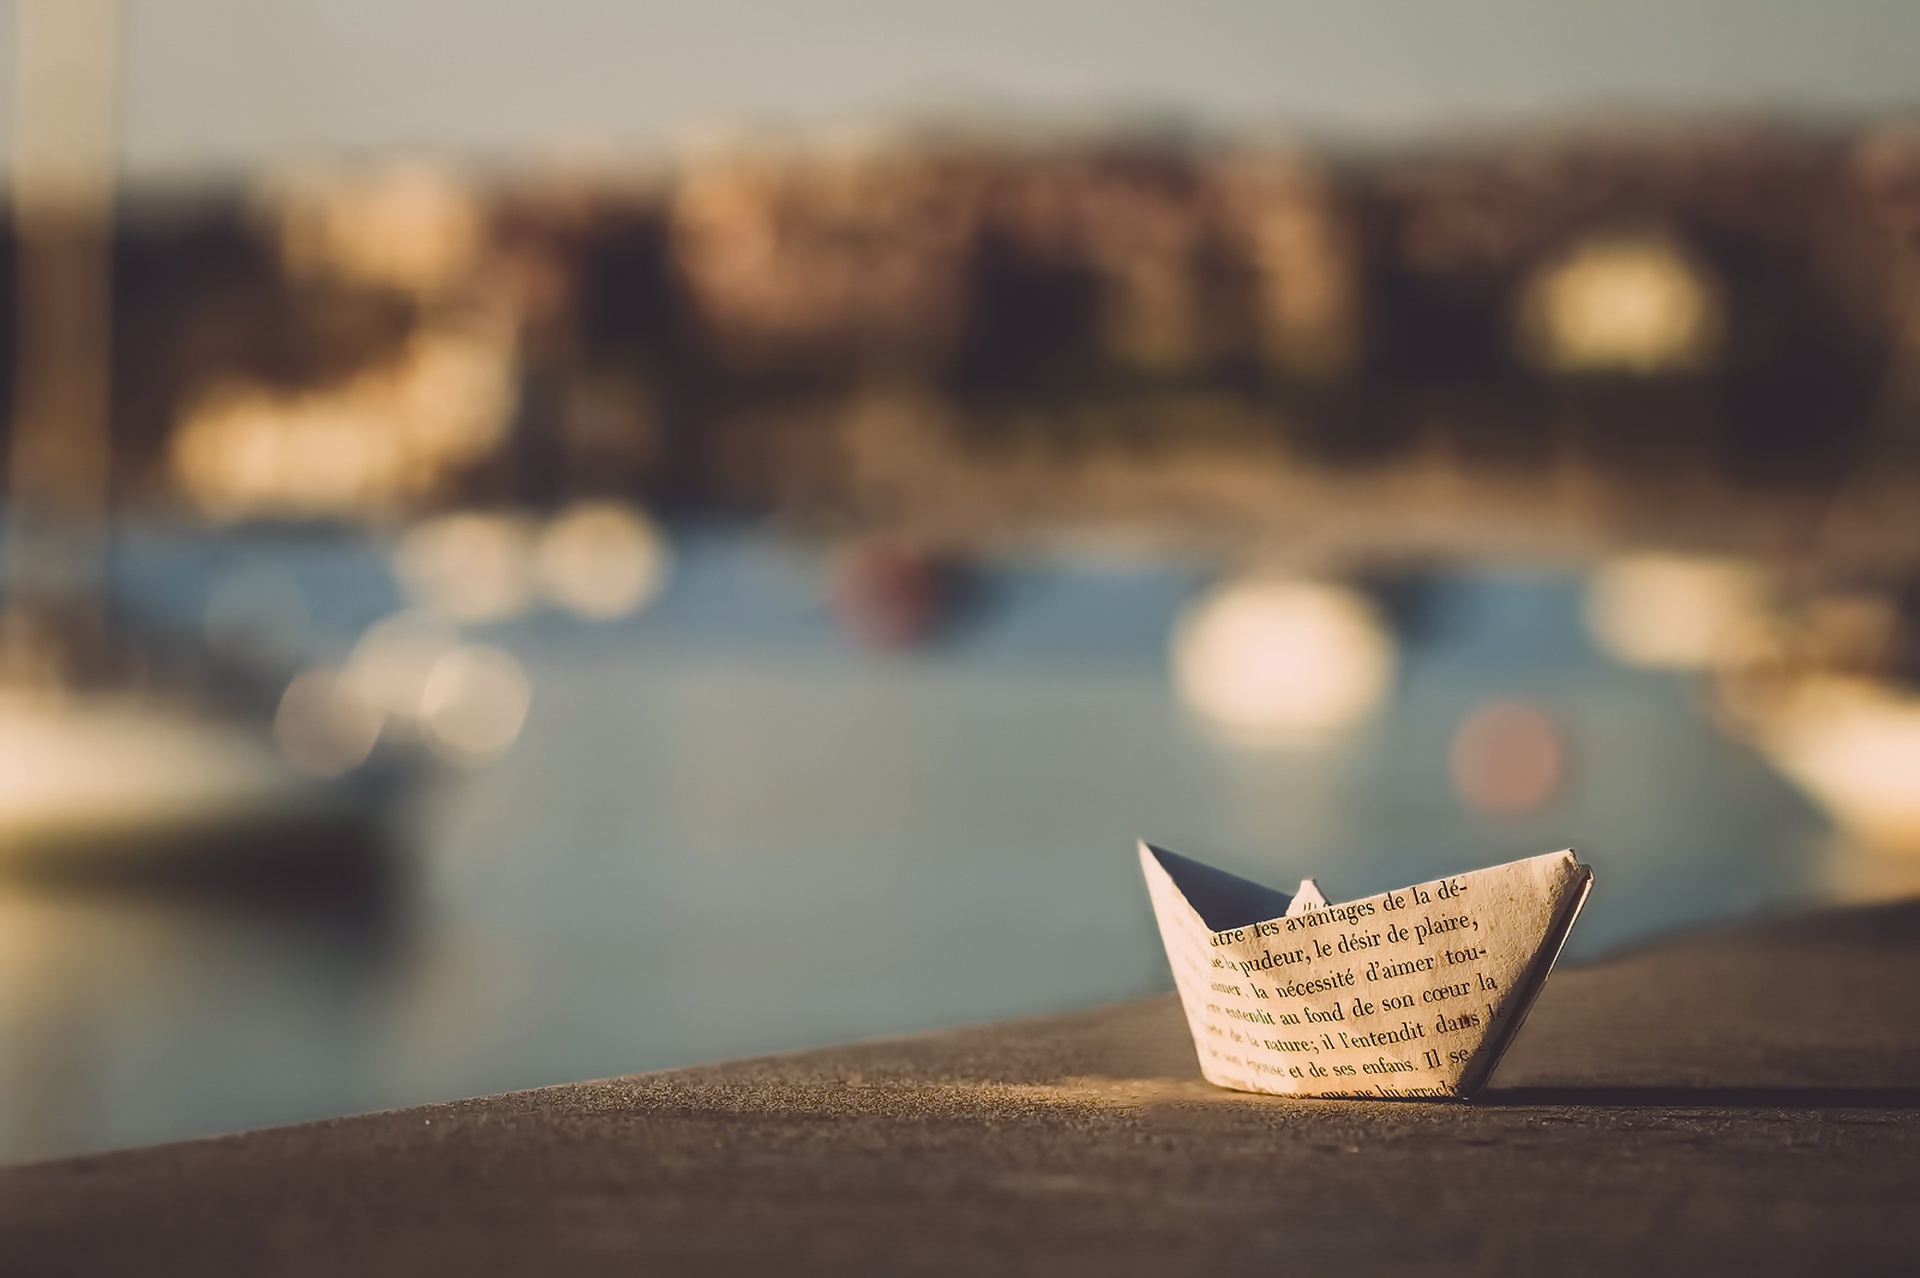 man made, origami, depth of field, paper boat